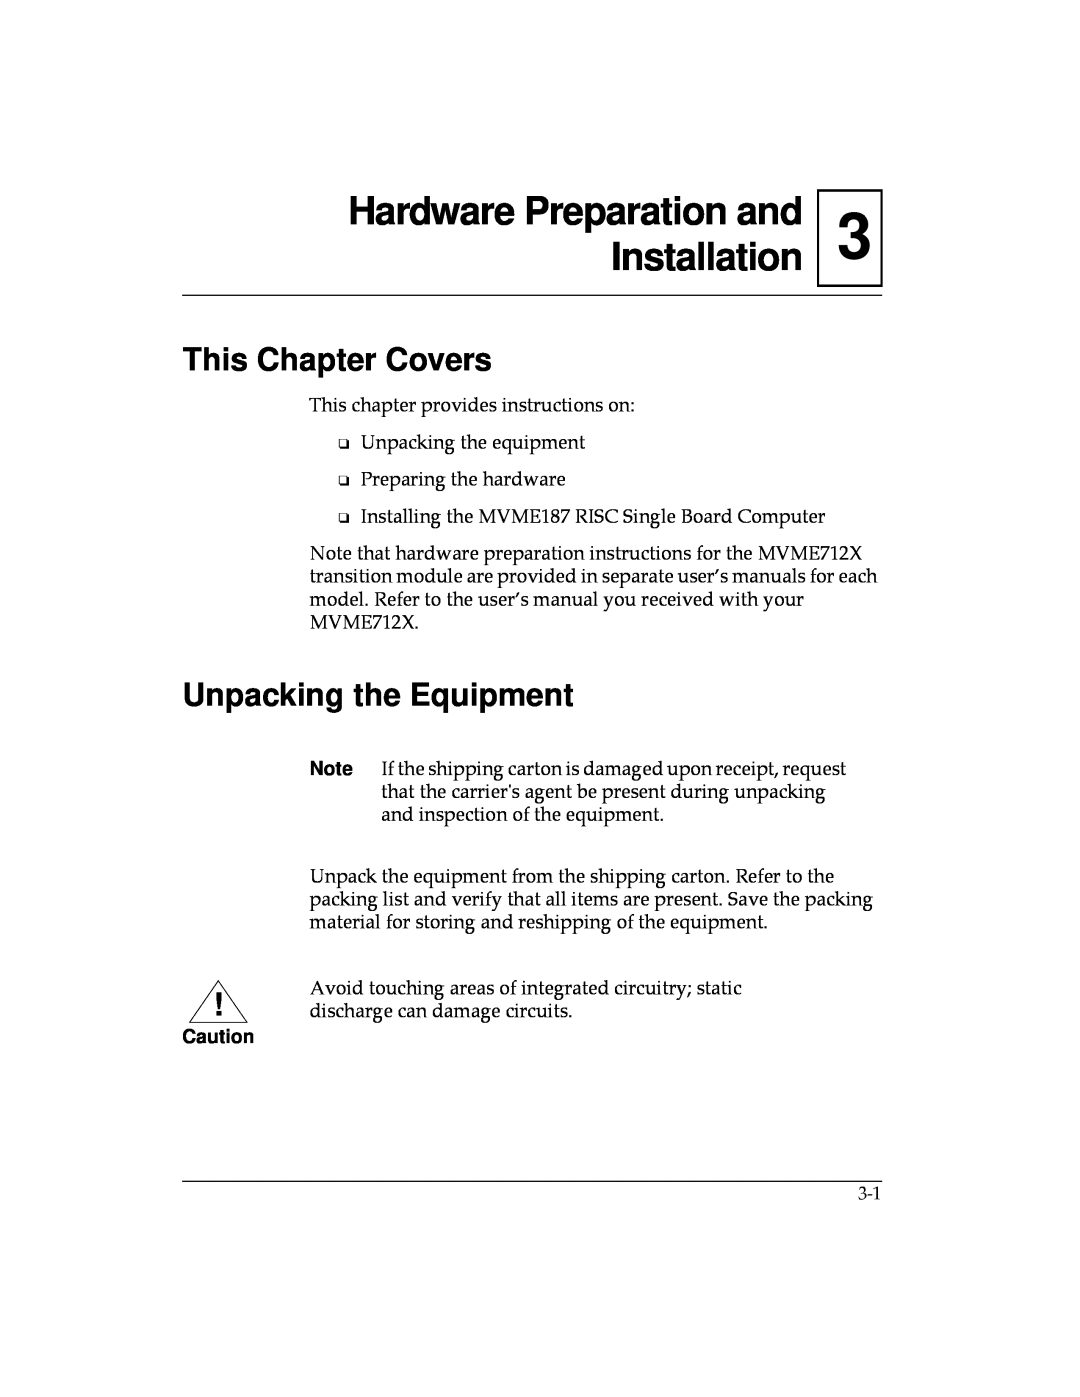 Motorola MVME187 manual Hardware Preparation and Installation, Unpacking the Equipment, This Chapter Covers 